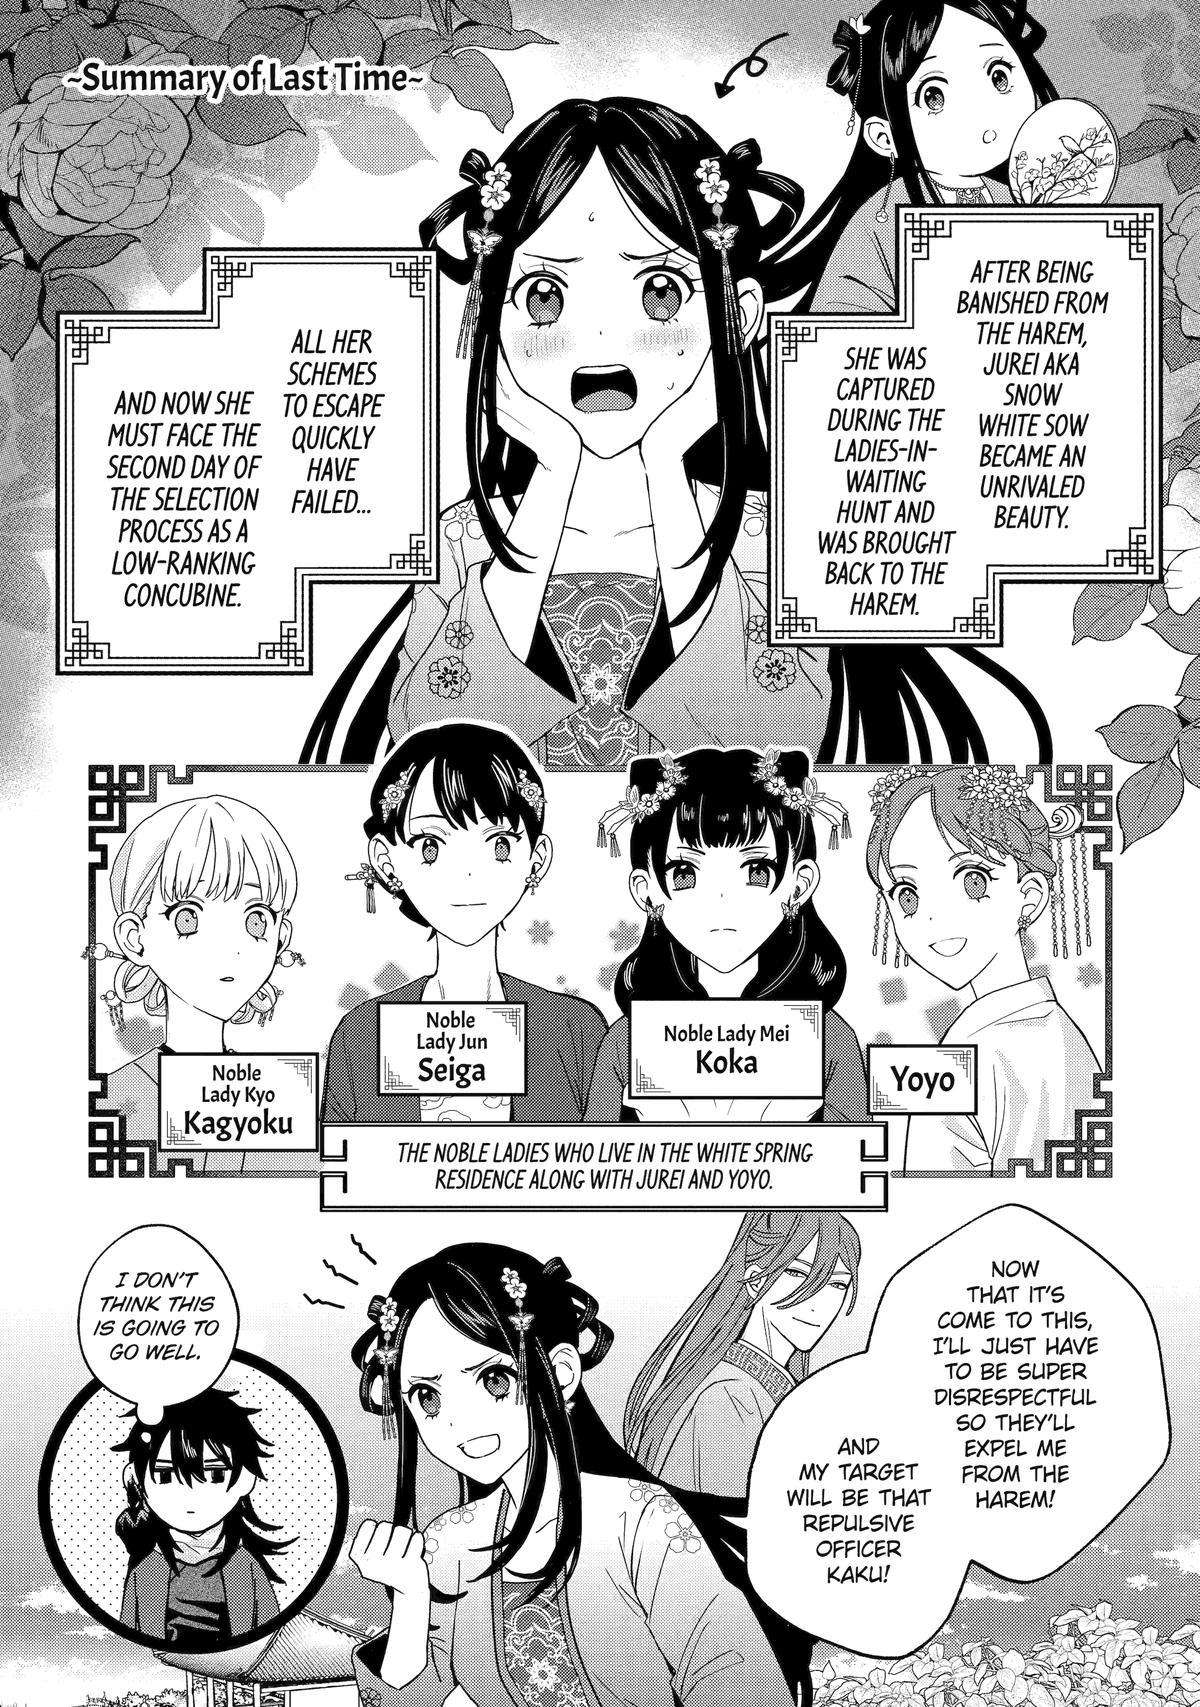 My Return to the Imperial Harem - chapter 4 - #1